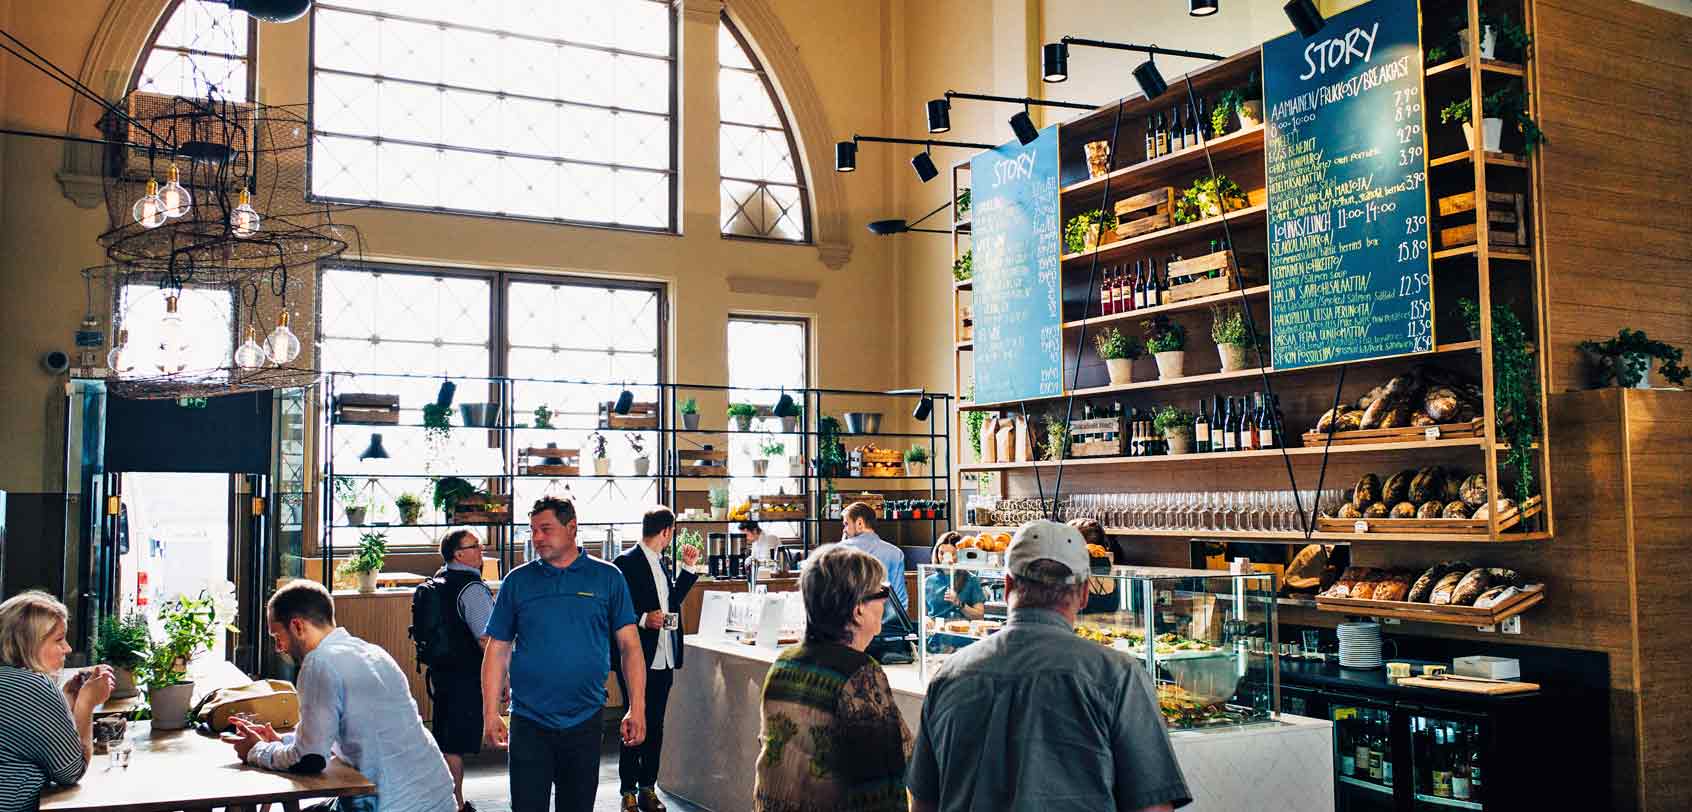 Free Things to Do in Helsinki: Old Market Hall